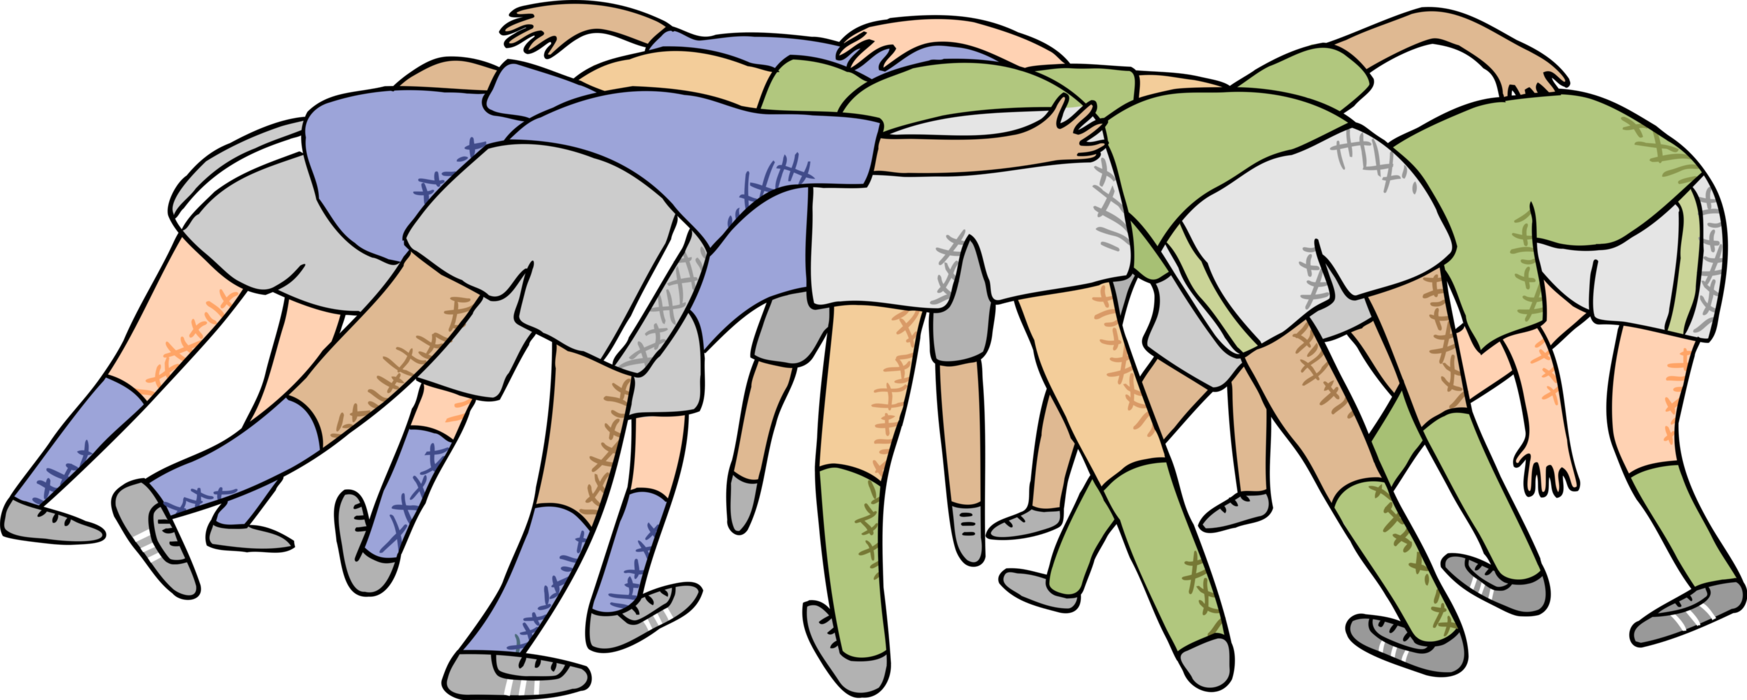 Vector Illustration of Rugby Players in Scrum Scrummage During Match Game